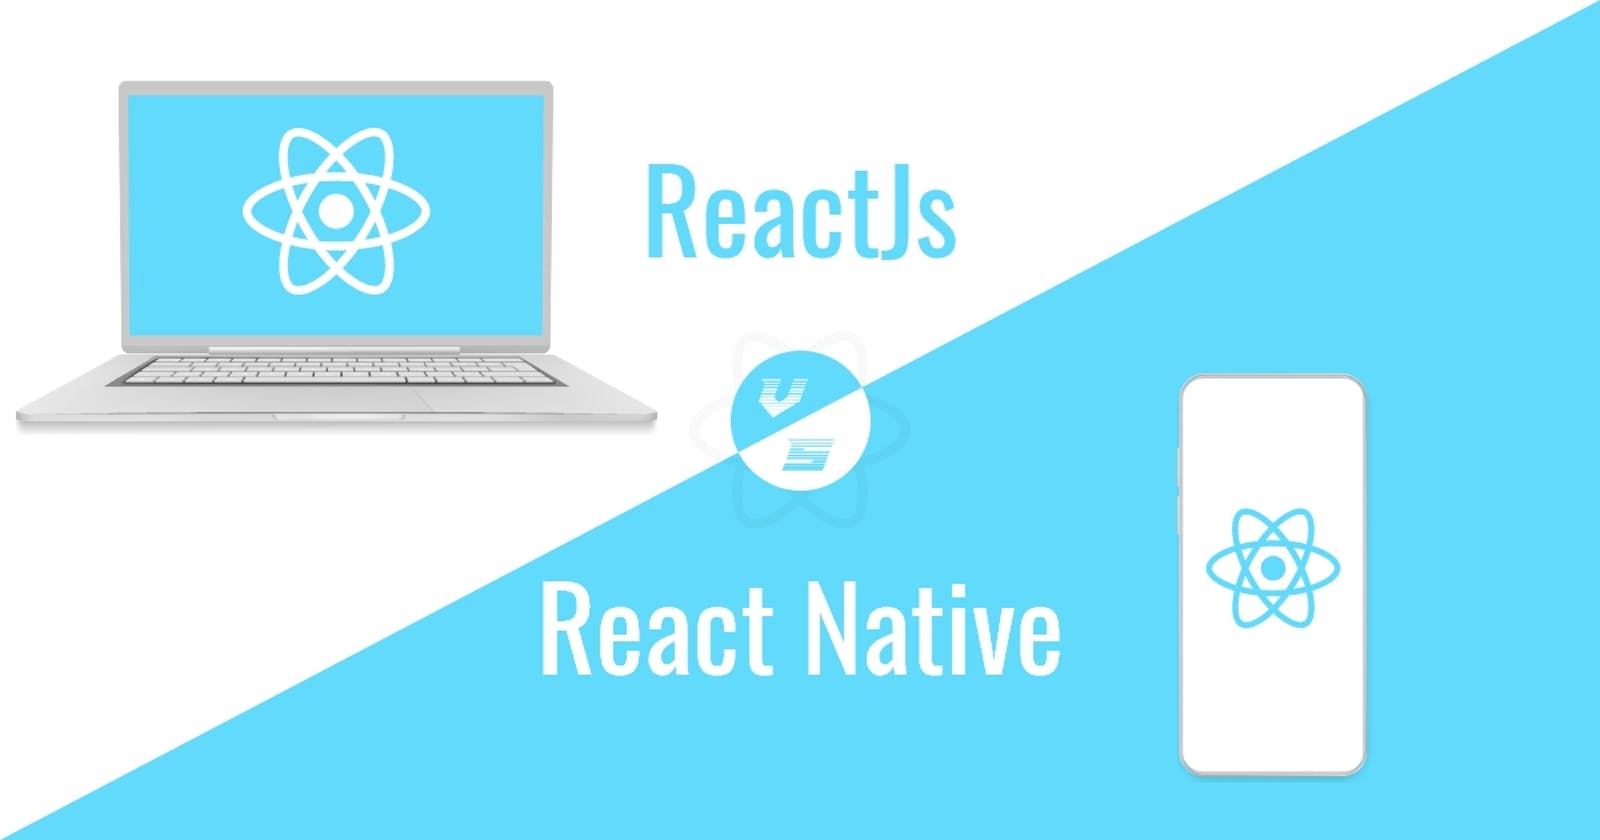 Differences Between ReactJS and React Native